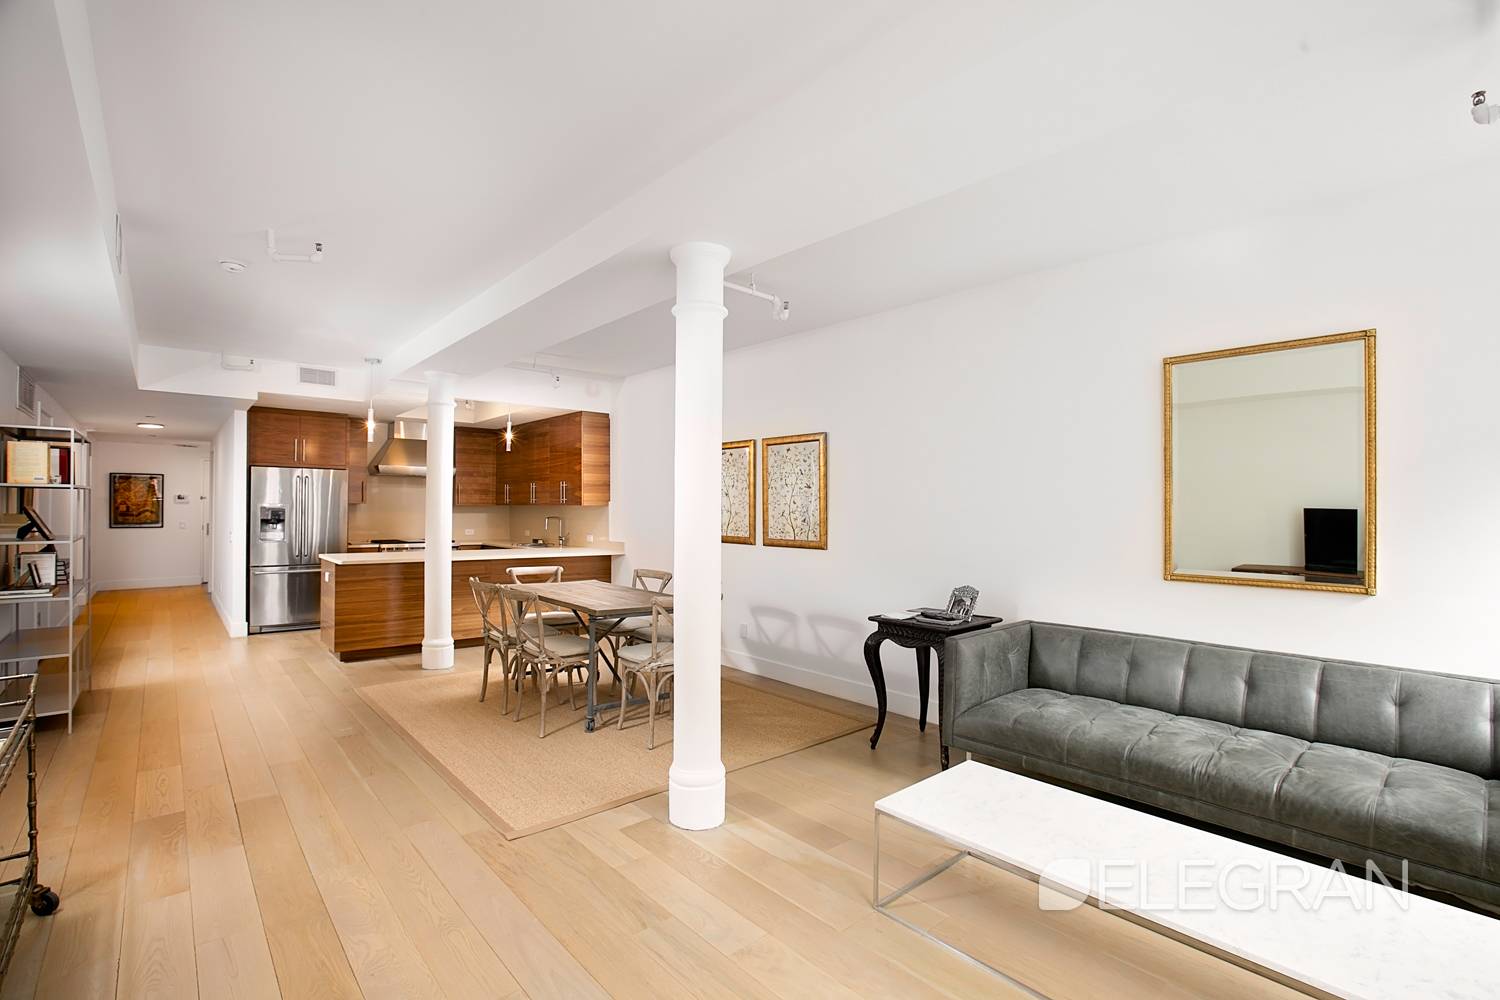 Amazing opportunity to own a competitively priced three bedroom, two full bathroom loft residence at 133 Mulberry, a building that blends contemporary luxury with timeless elegance.